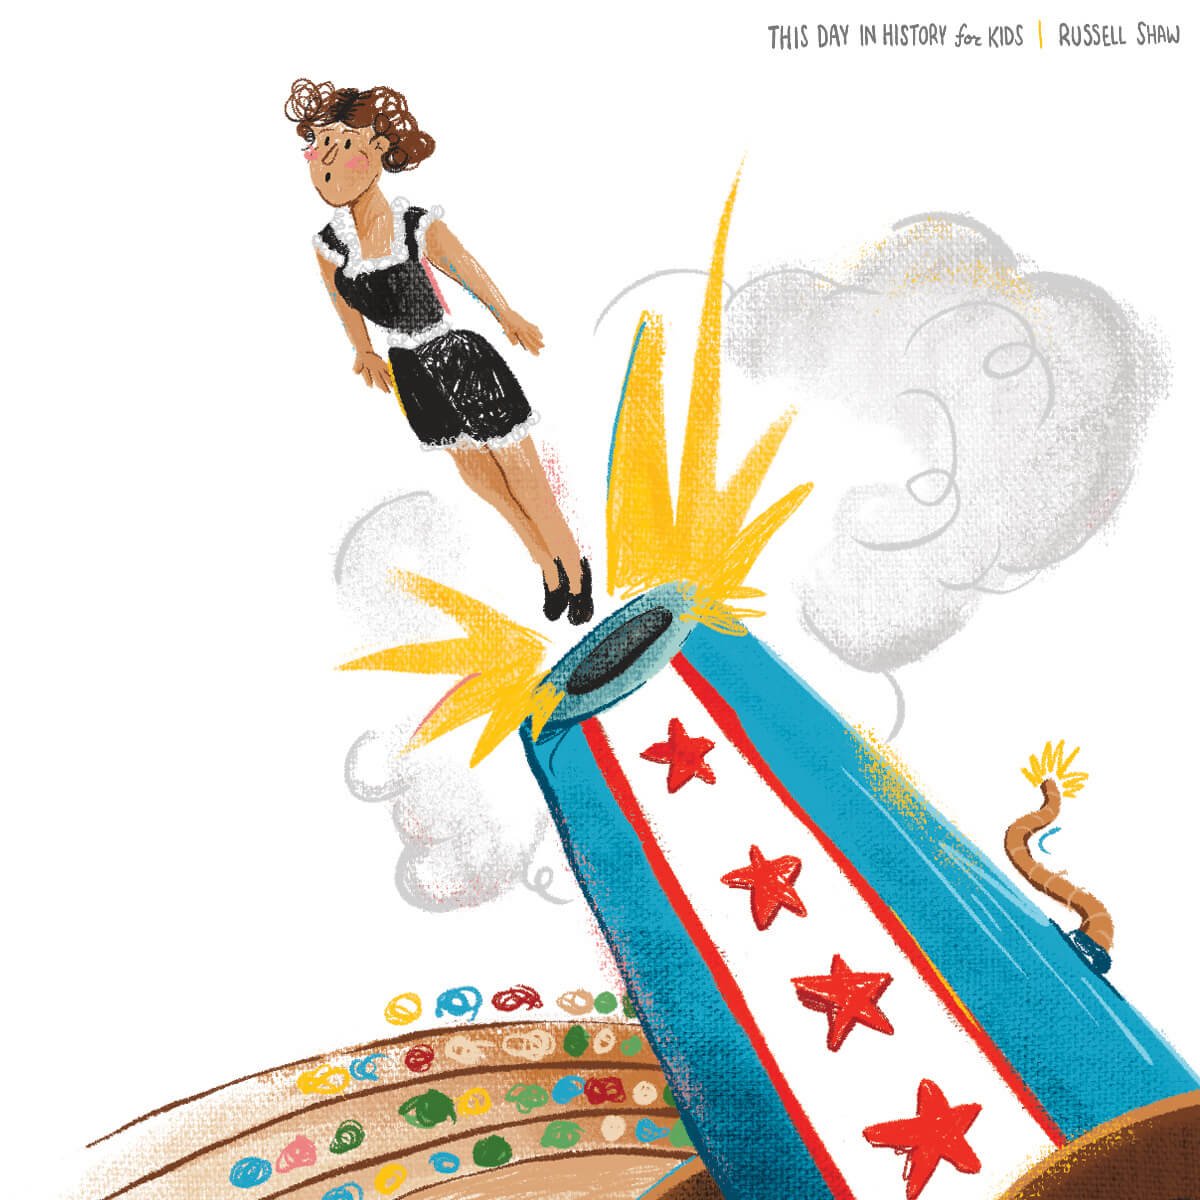  A whimsical illustration of a young girl being launched into the air from a colorful cannon, surrounded by a playful burst of smoke and stars, capturing a moment of adventurous make-believe. 